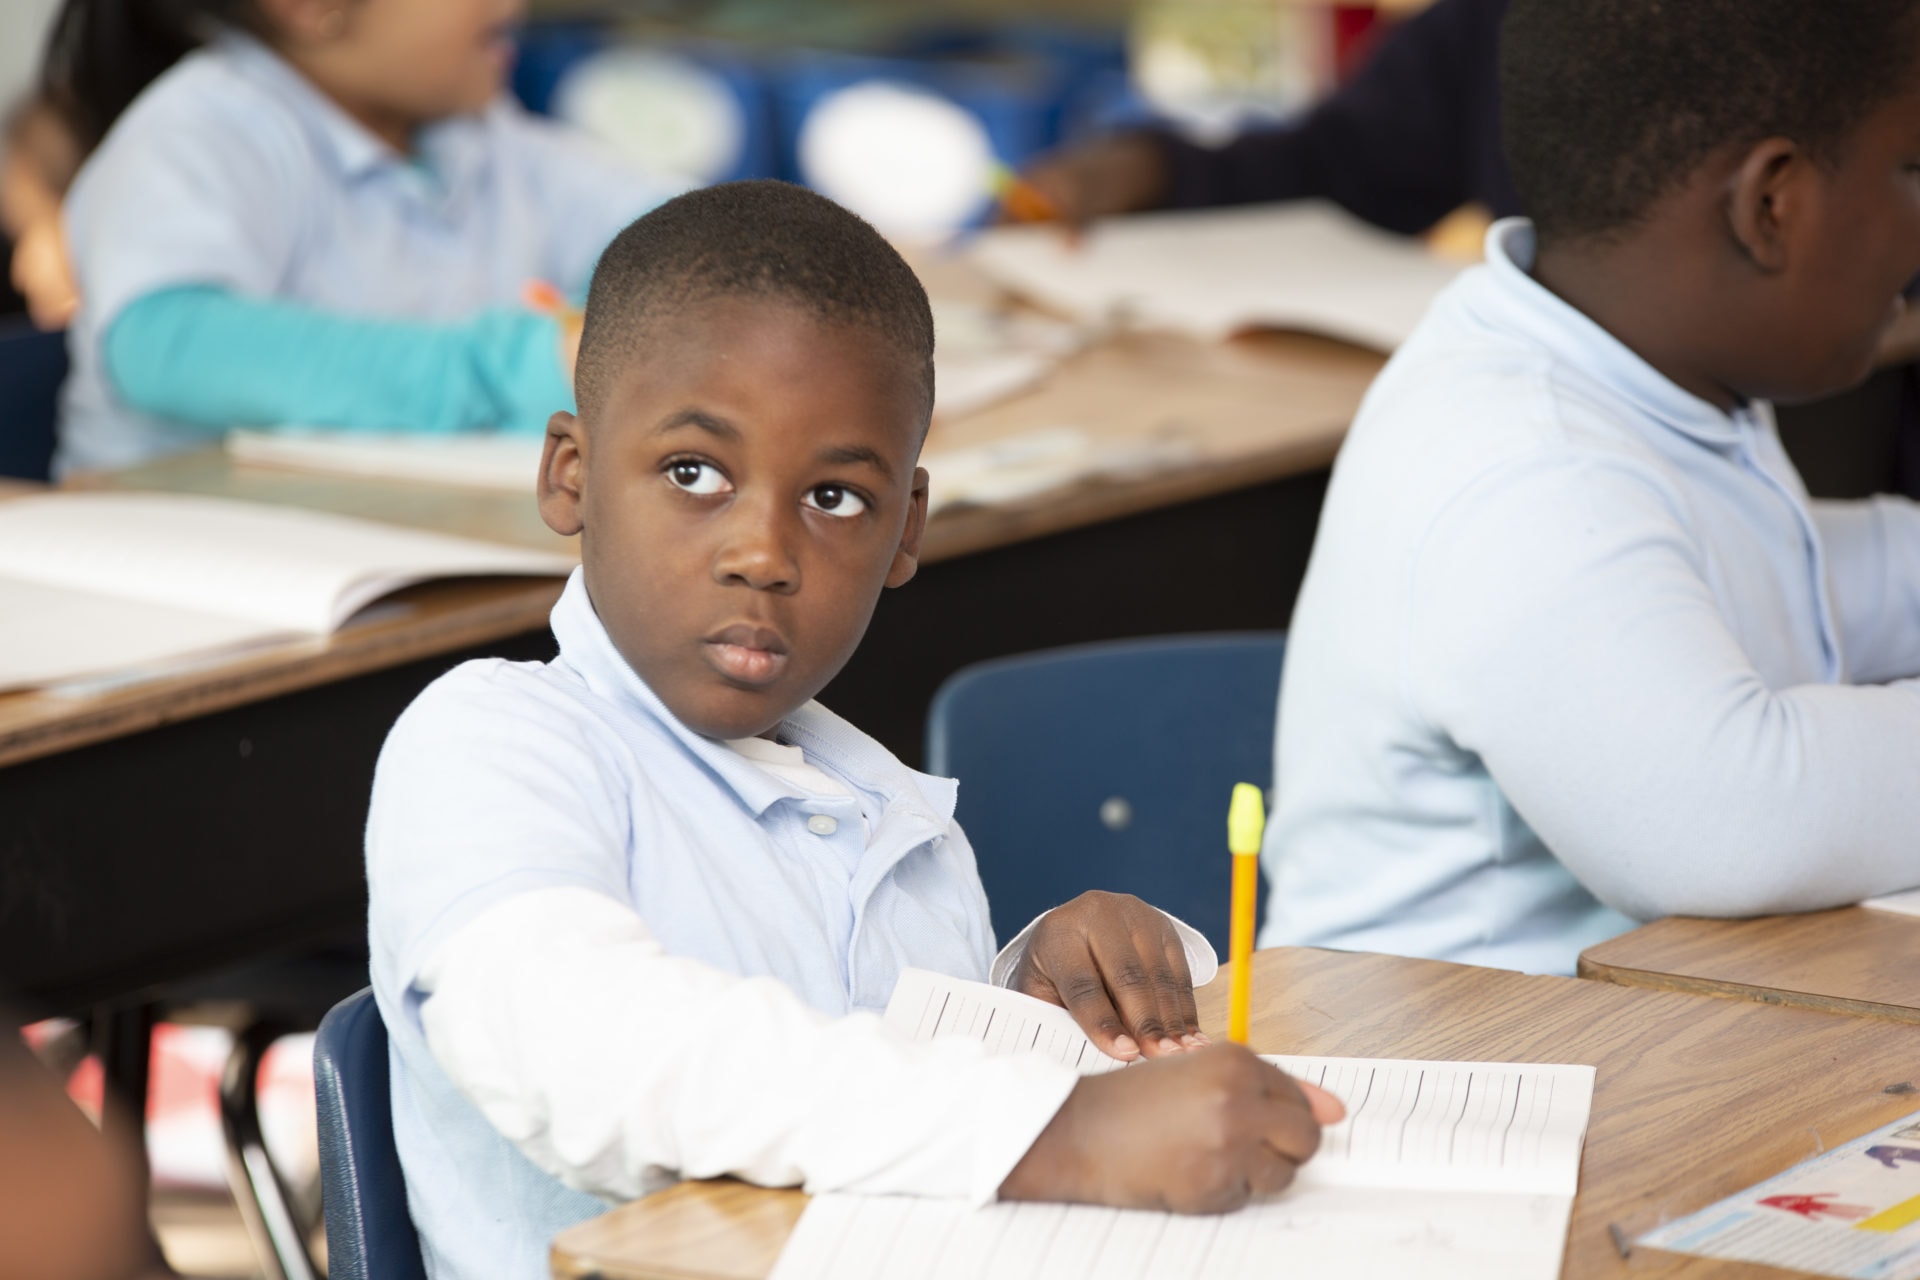 Young boy in a classroom, holding a pencil, looking at the camera while classmates work in the background.